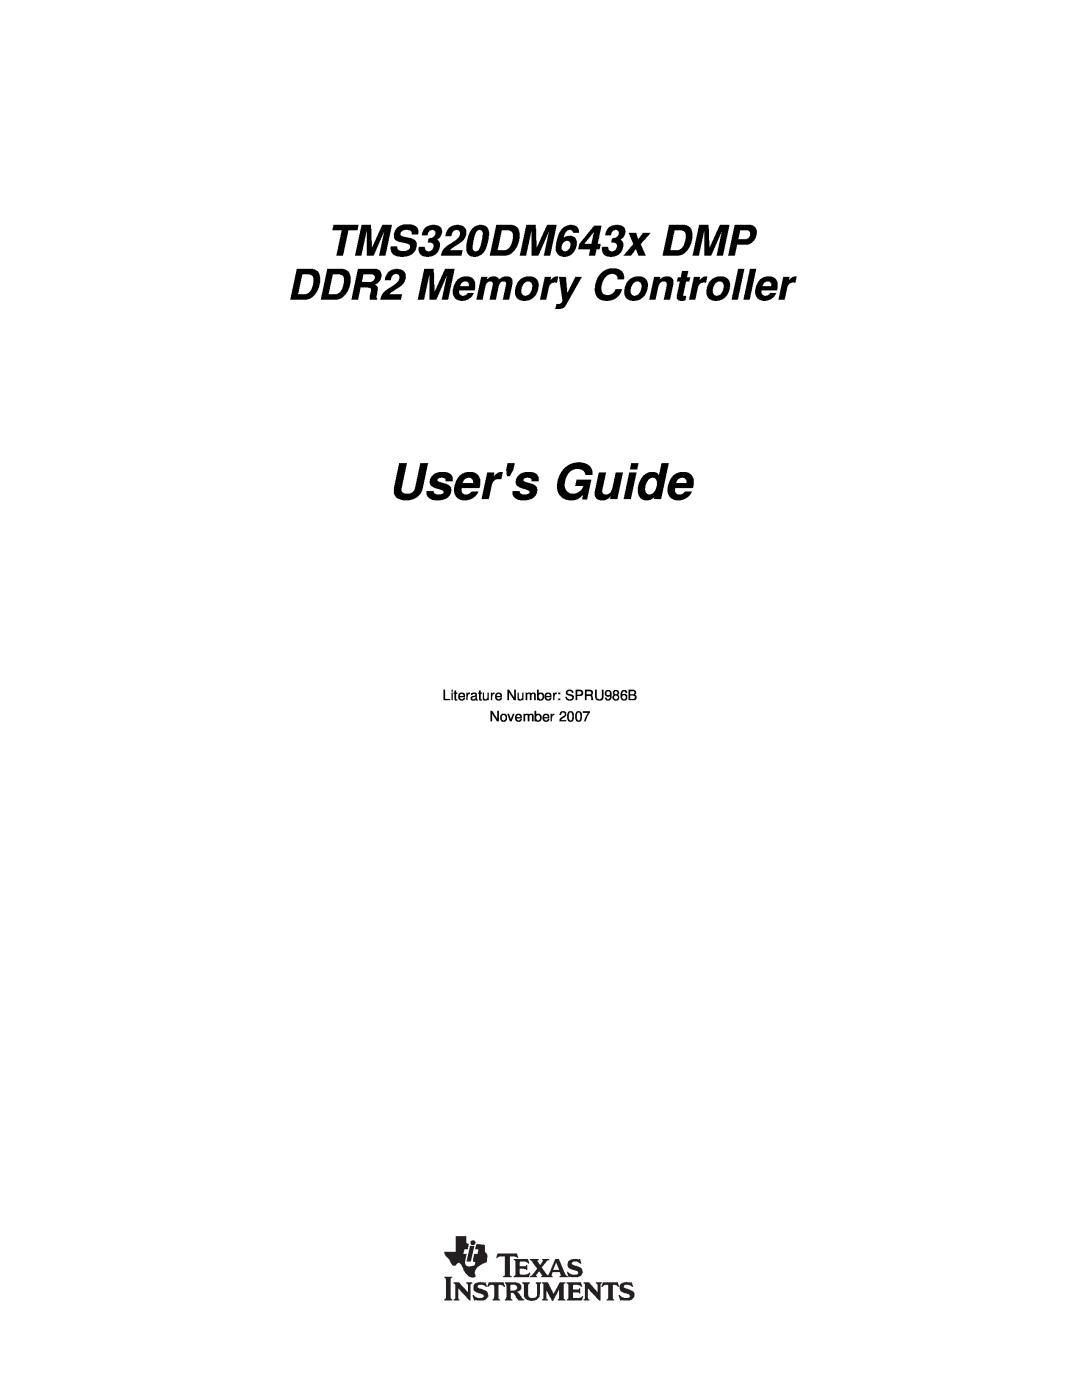 Texas Instruments manual Users Guide, TMS320DM643x DMP DDR2 Memory Controller 